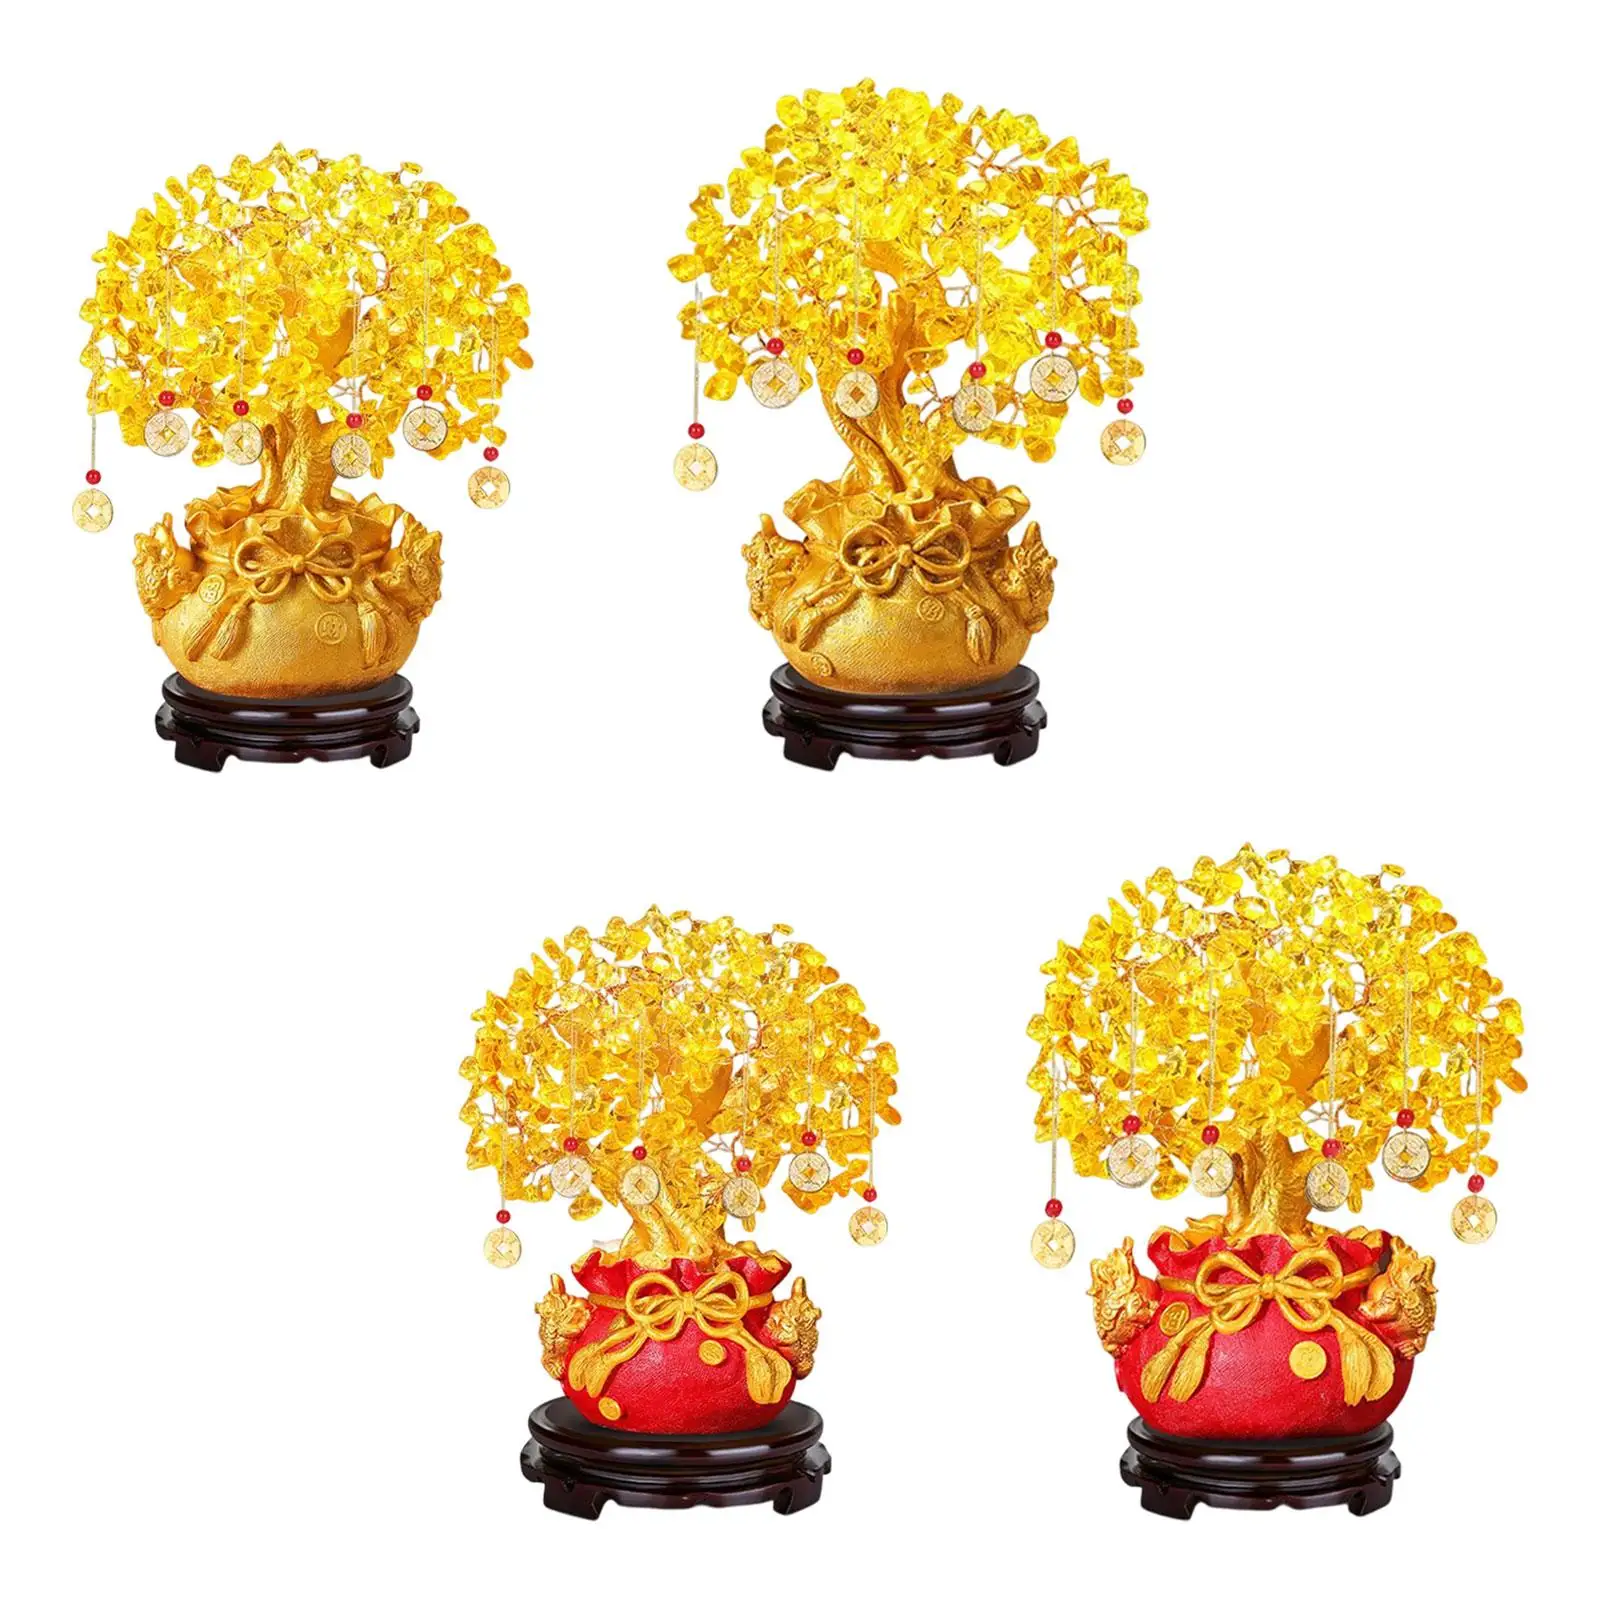 New Year Money Tree Bonsai Decoration Feng Shui Sculpture for New Year